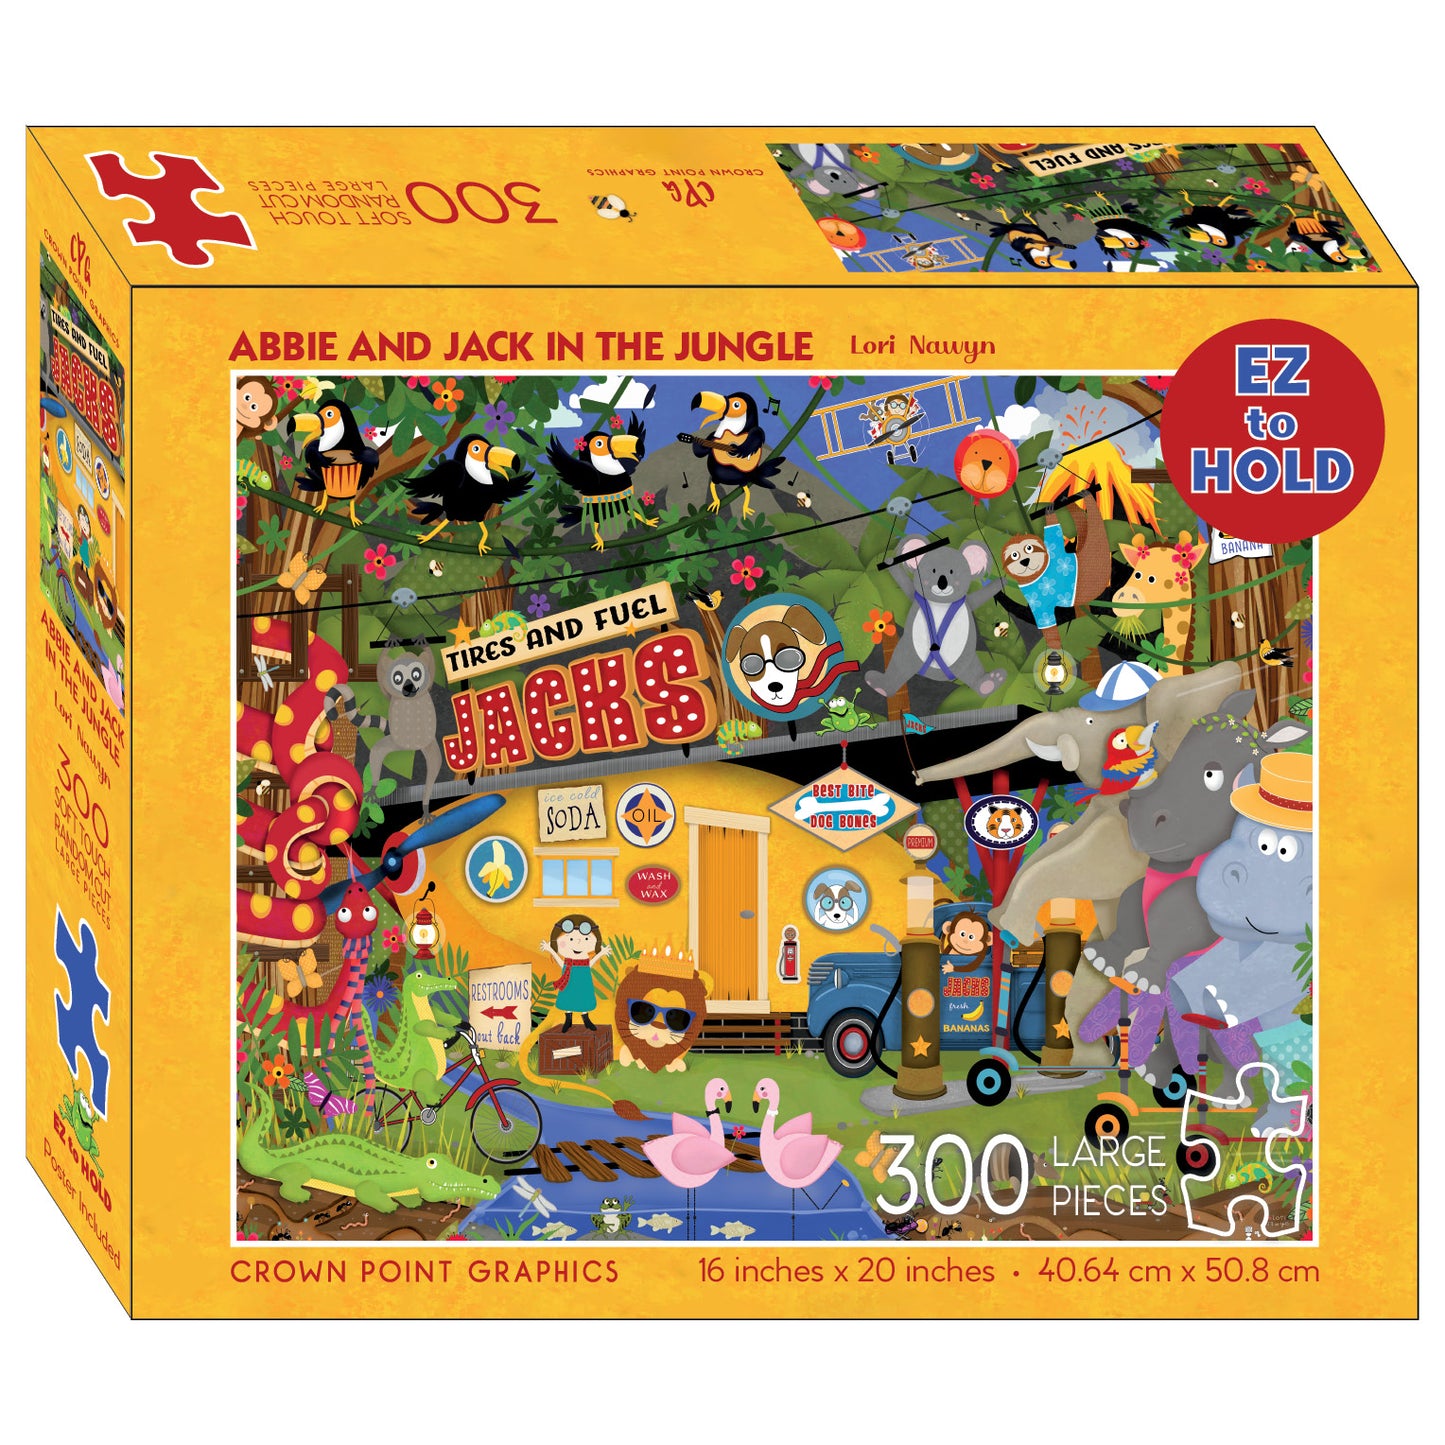 Abbie and Jack In the Jungle - 300 Piece Jigsaw Puzzle